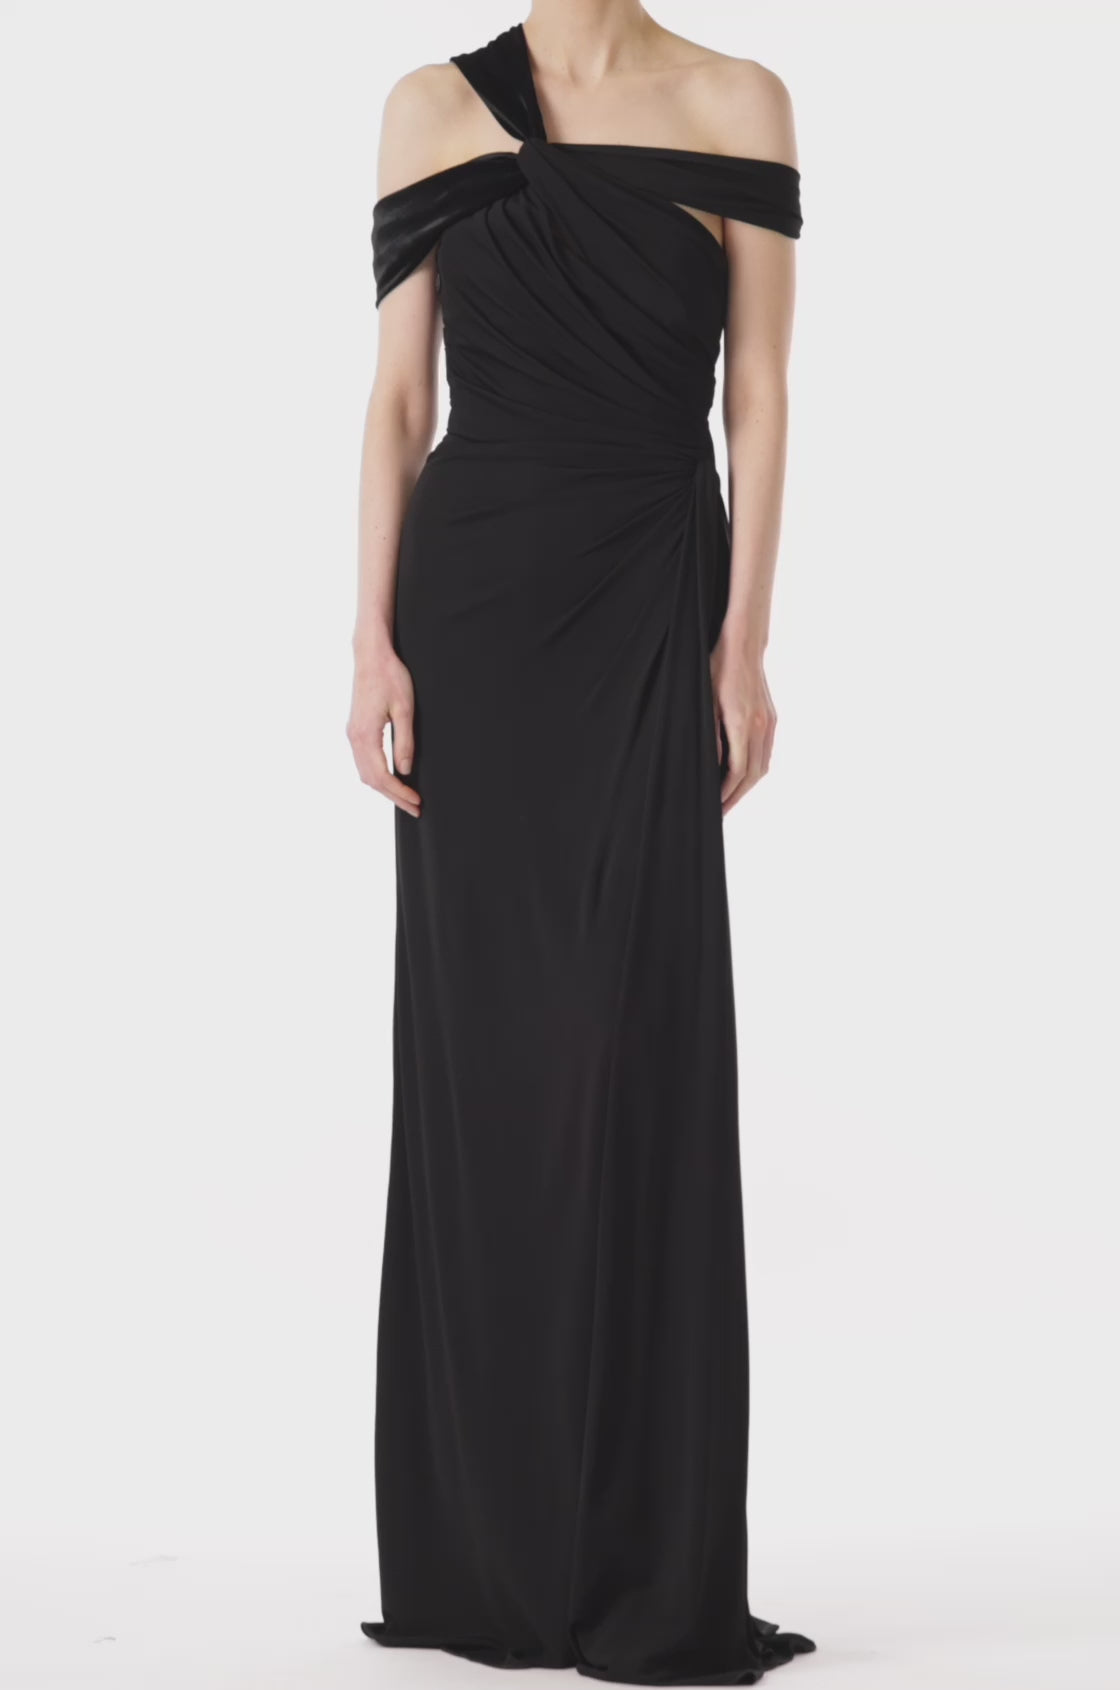 Monique Lhuillier asymmetric neckline gown in black jersey and velvet with draped bodice and front slit.